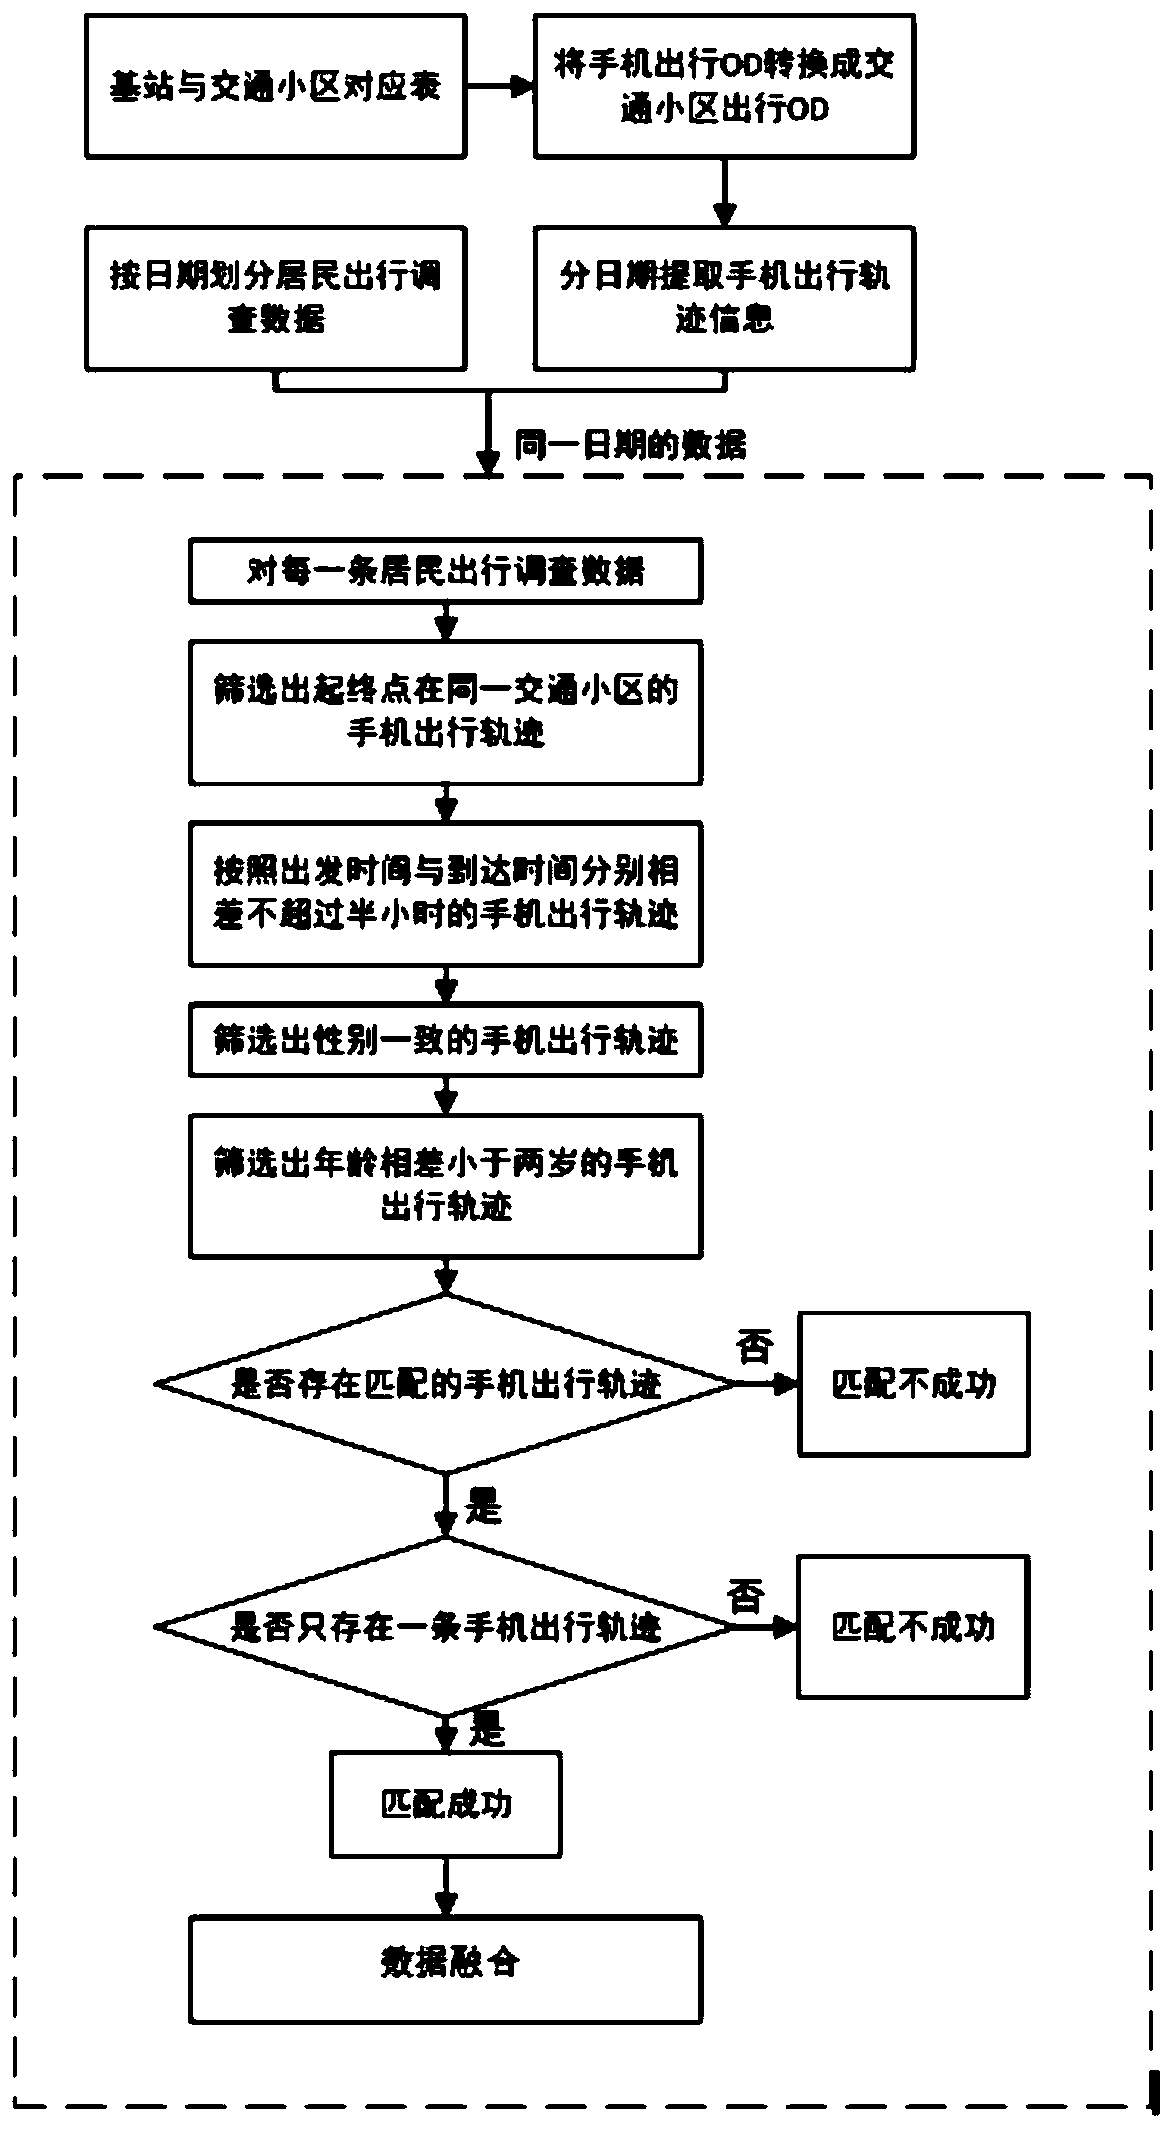 Method for obtaining mobile phone signaling track data with label based on resident survey data